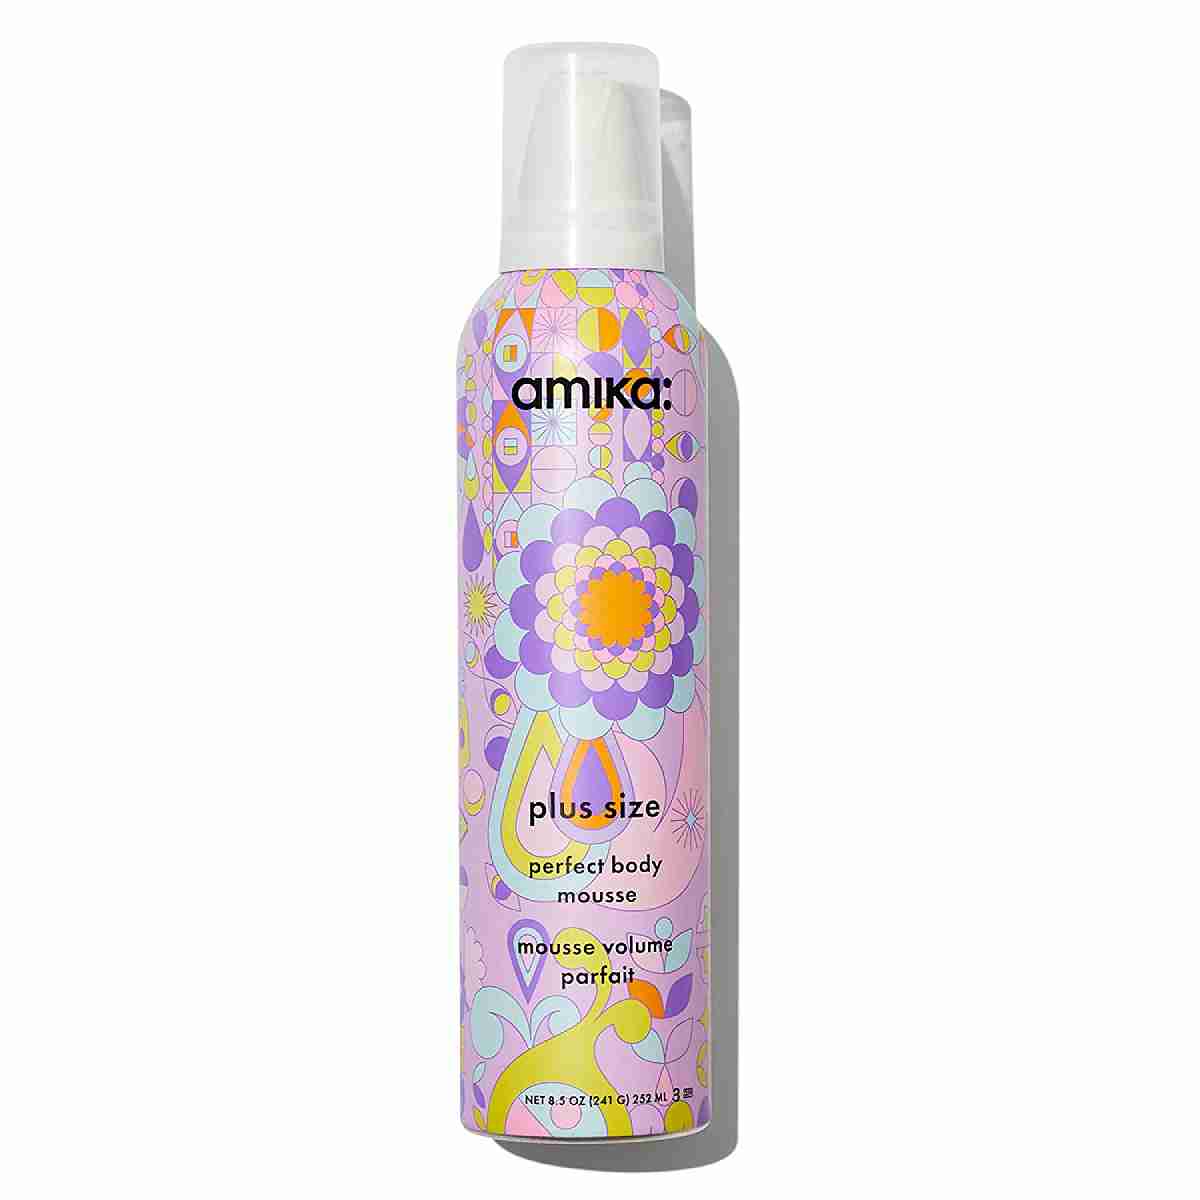 Amika plus size perfect body mousse for curtain bangs